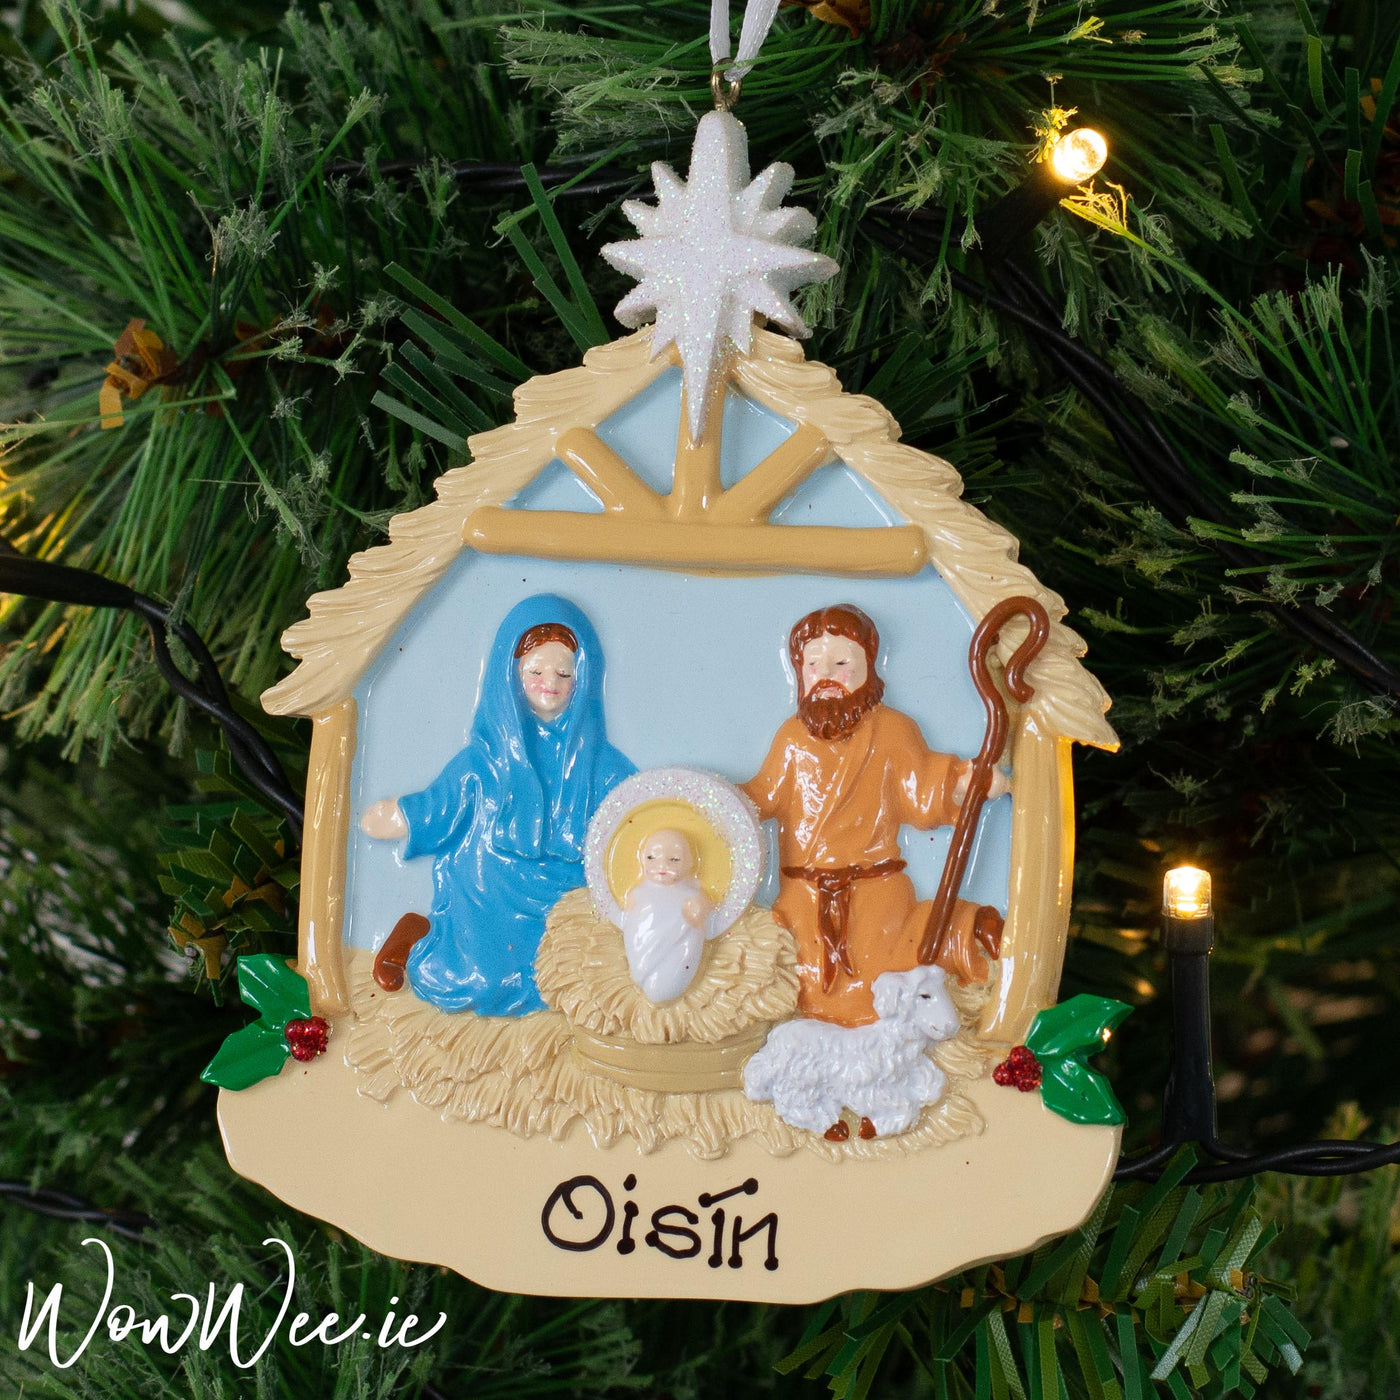 Nativity ornaments by their nature are suitable for all christmas trees around the world.  Its a personalised way of celebrating the birth of Jesus into the world.